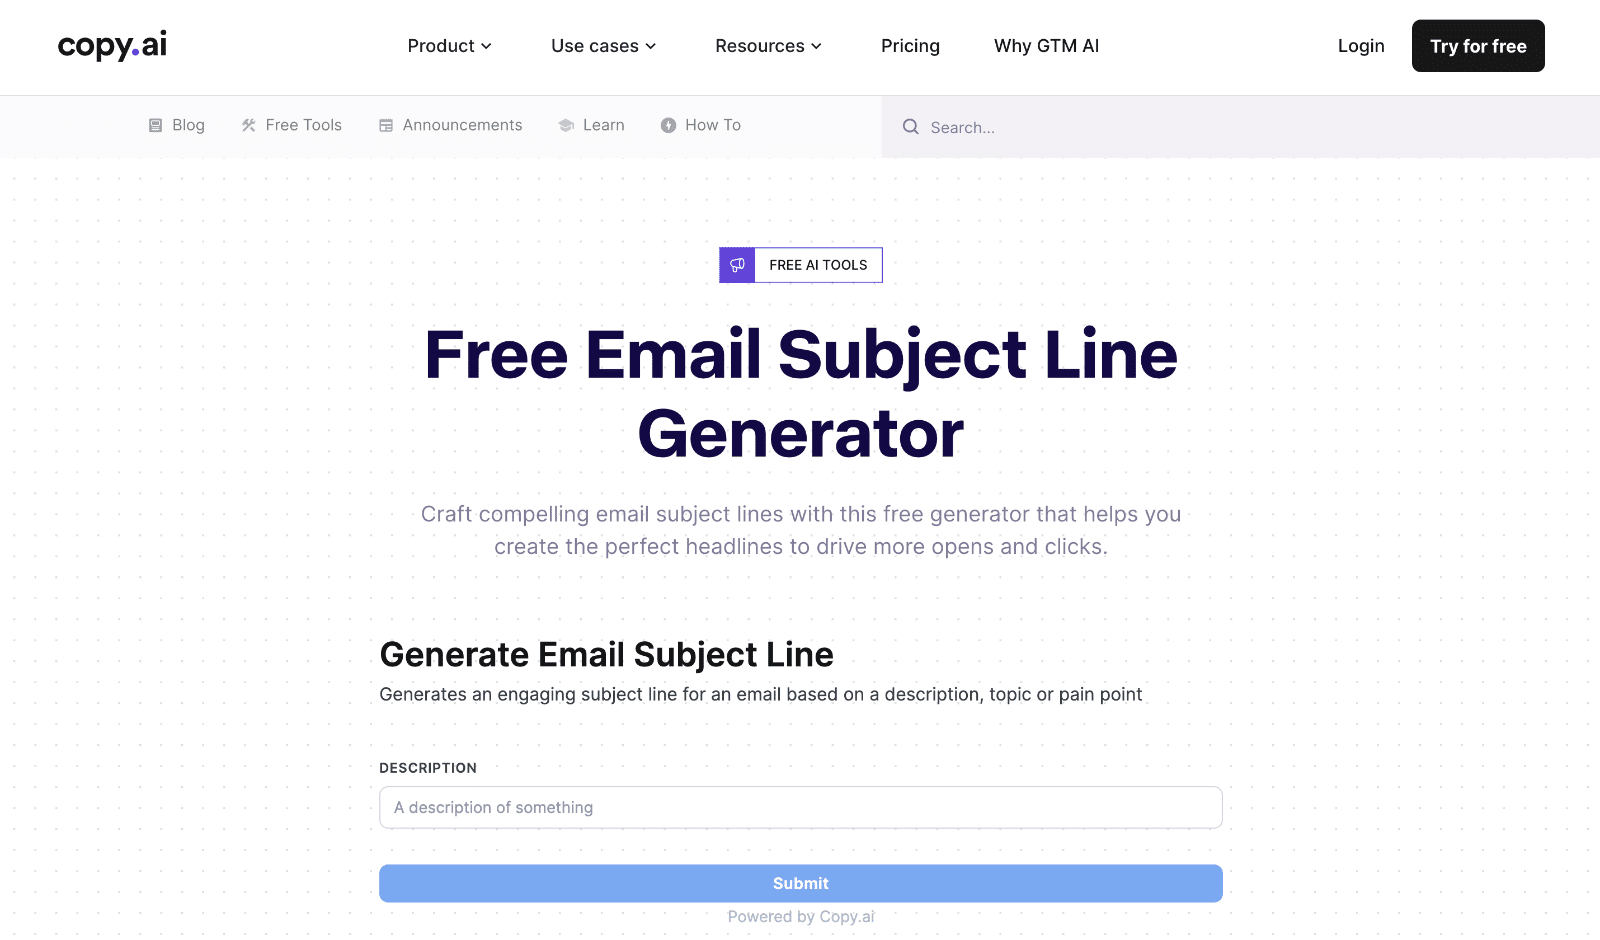 Copy.ai's email subject line generator tool